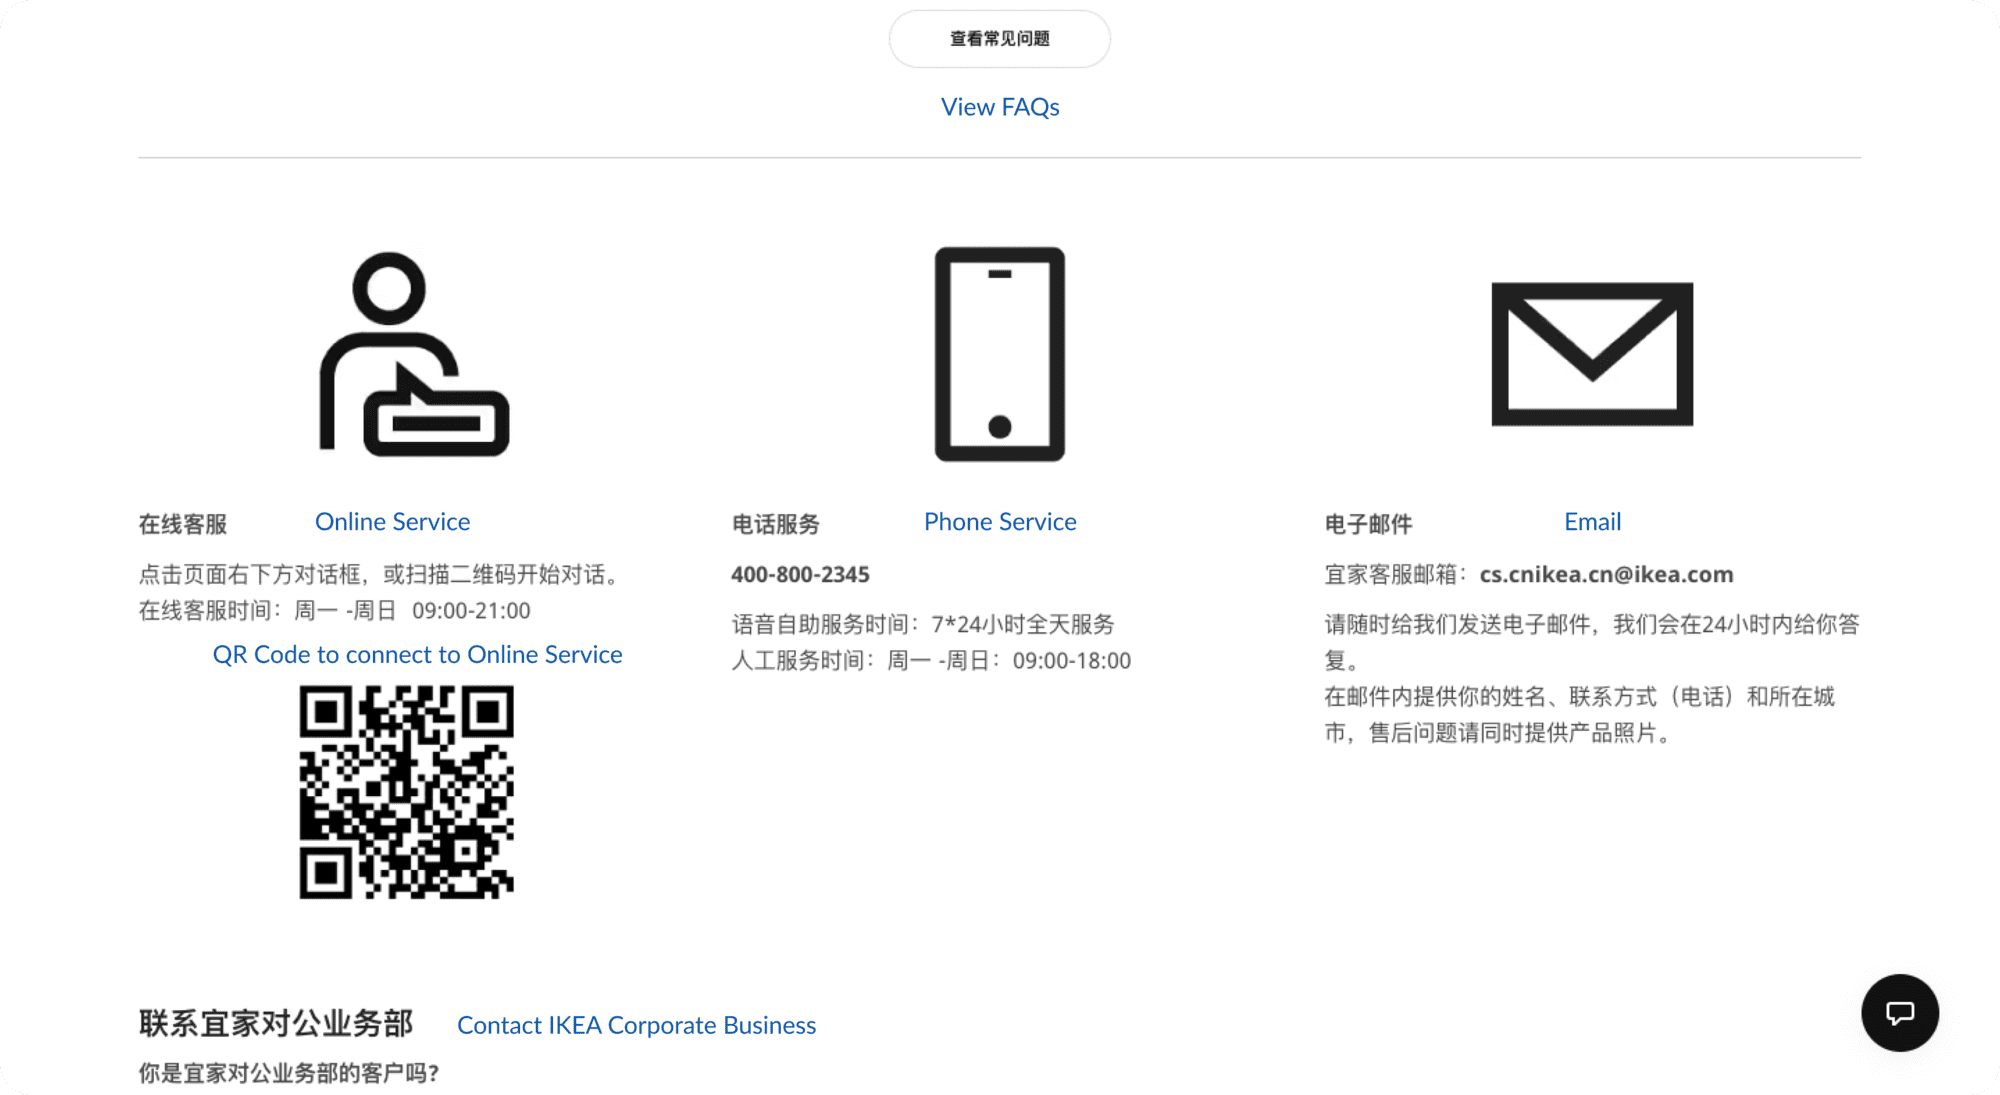 The Contact Us page of IKEA China website, one of ITC's past clients